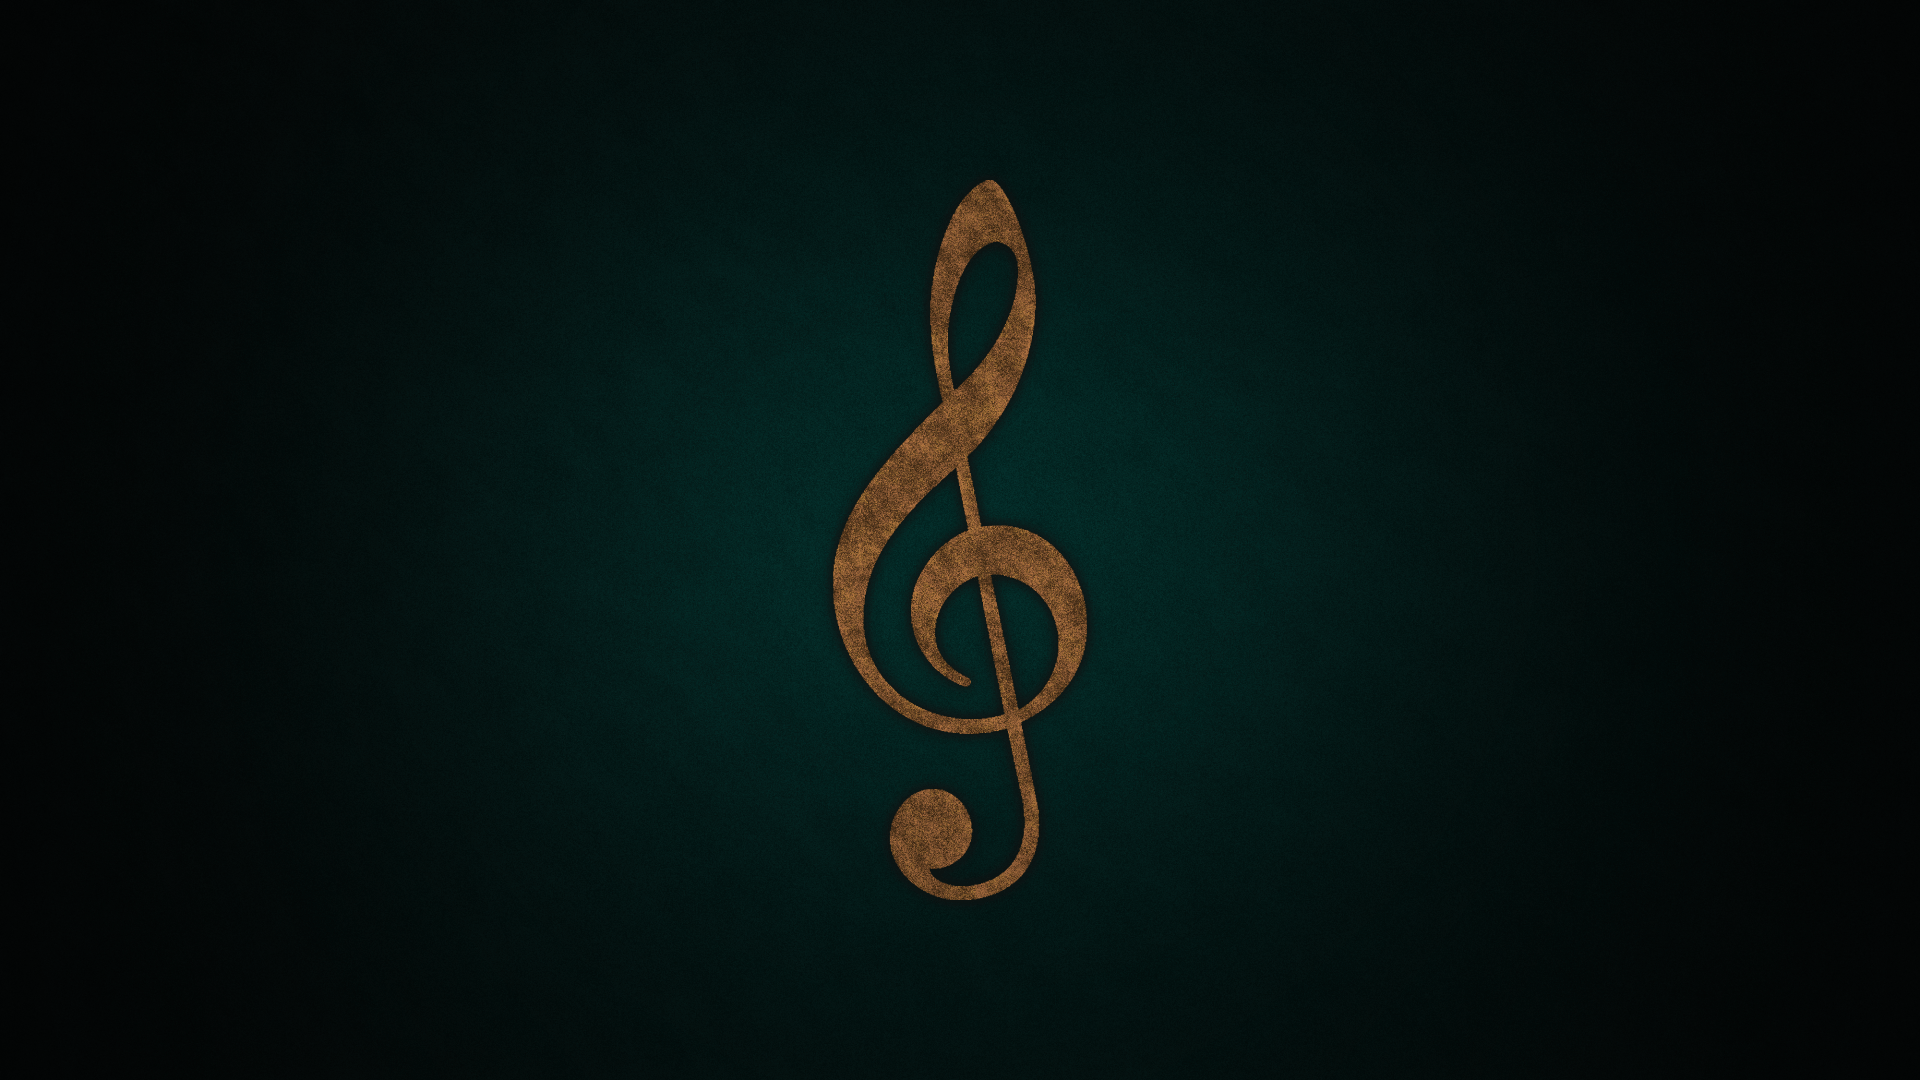 Music 4k Wallpapers - Top Free Music 4k Backgrounds ...